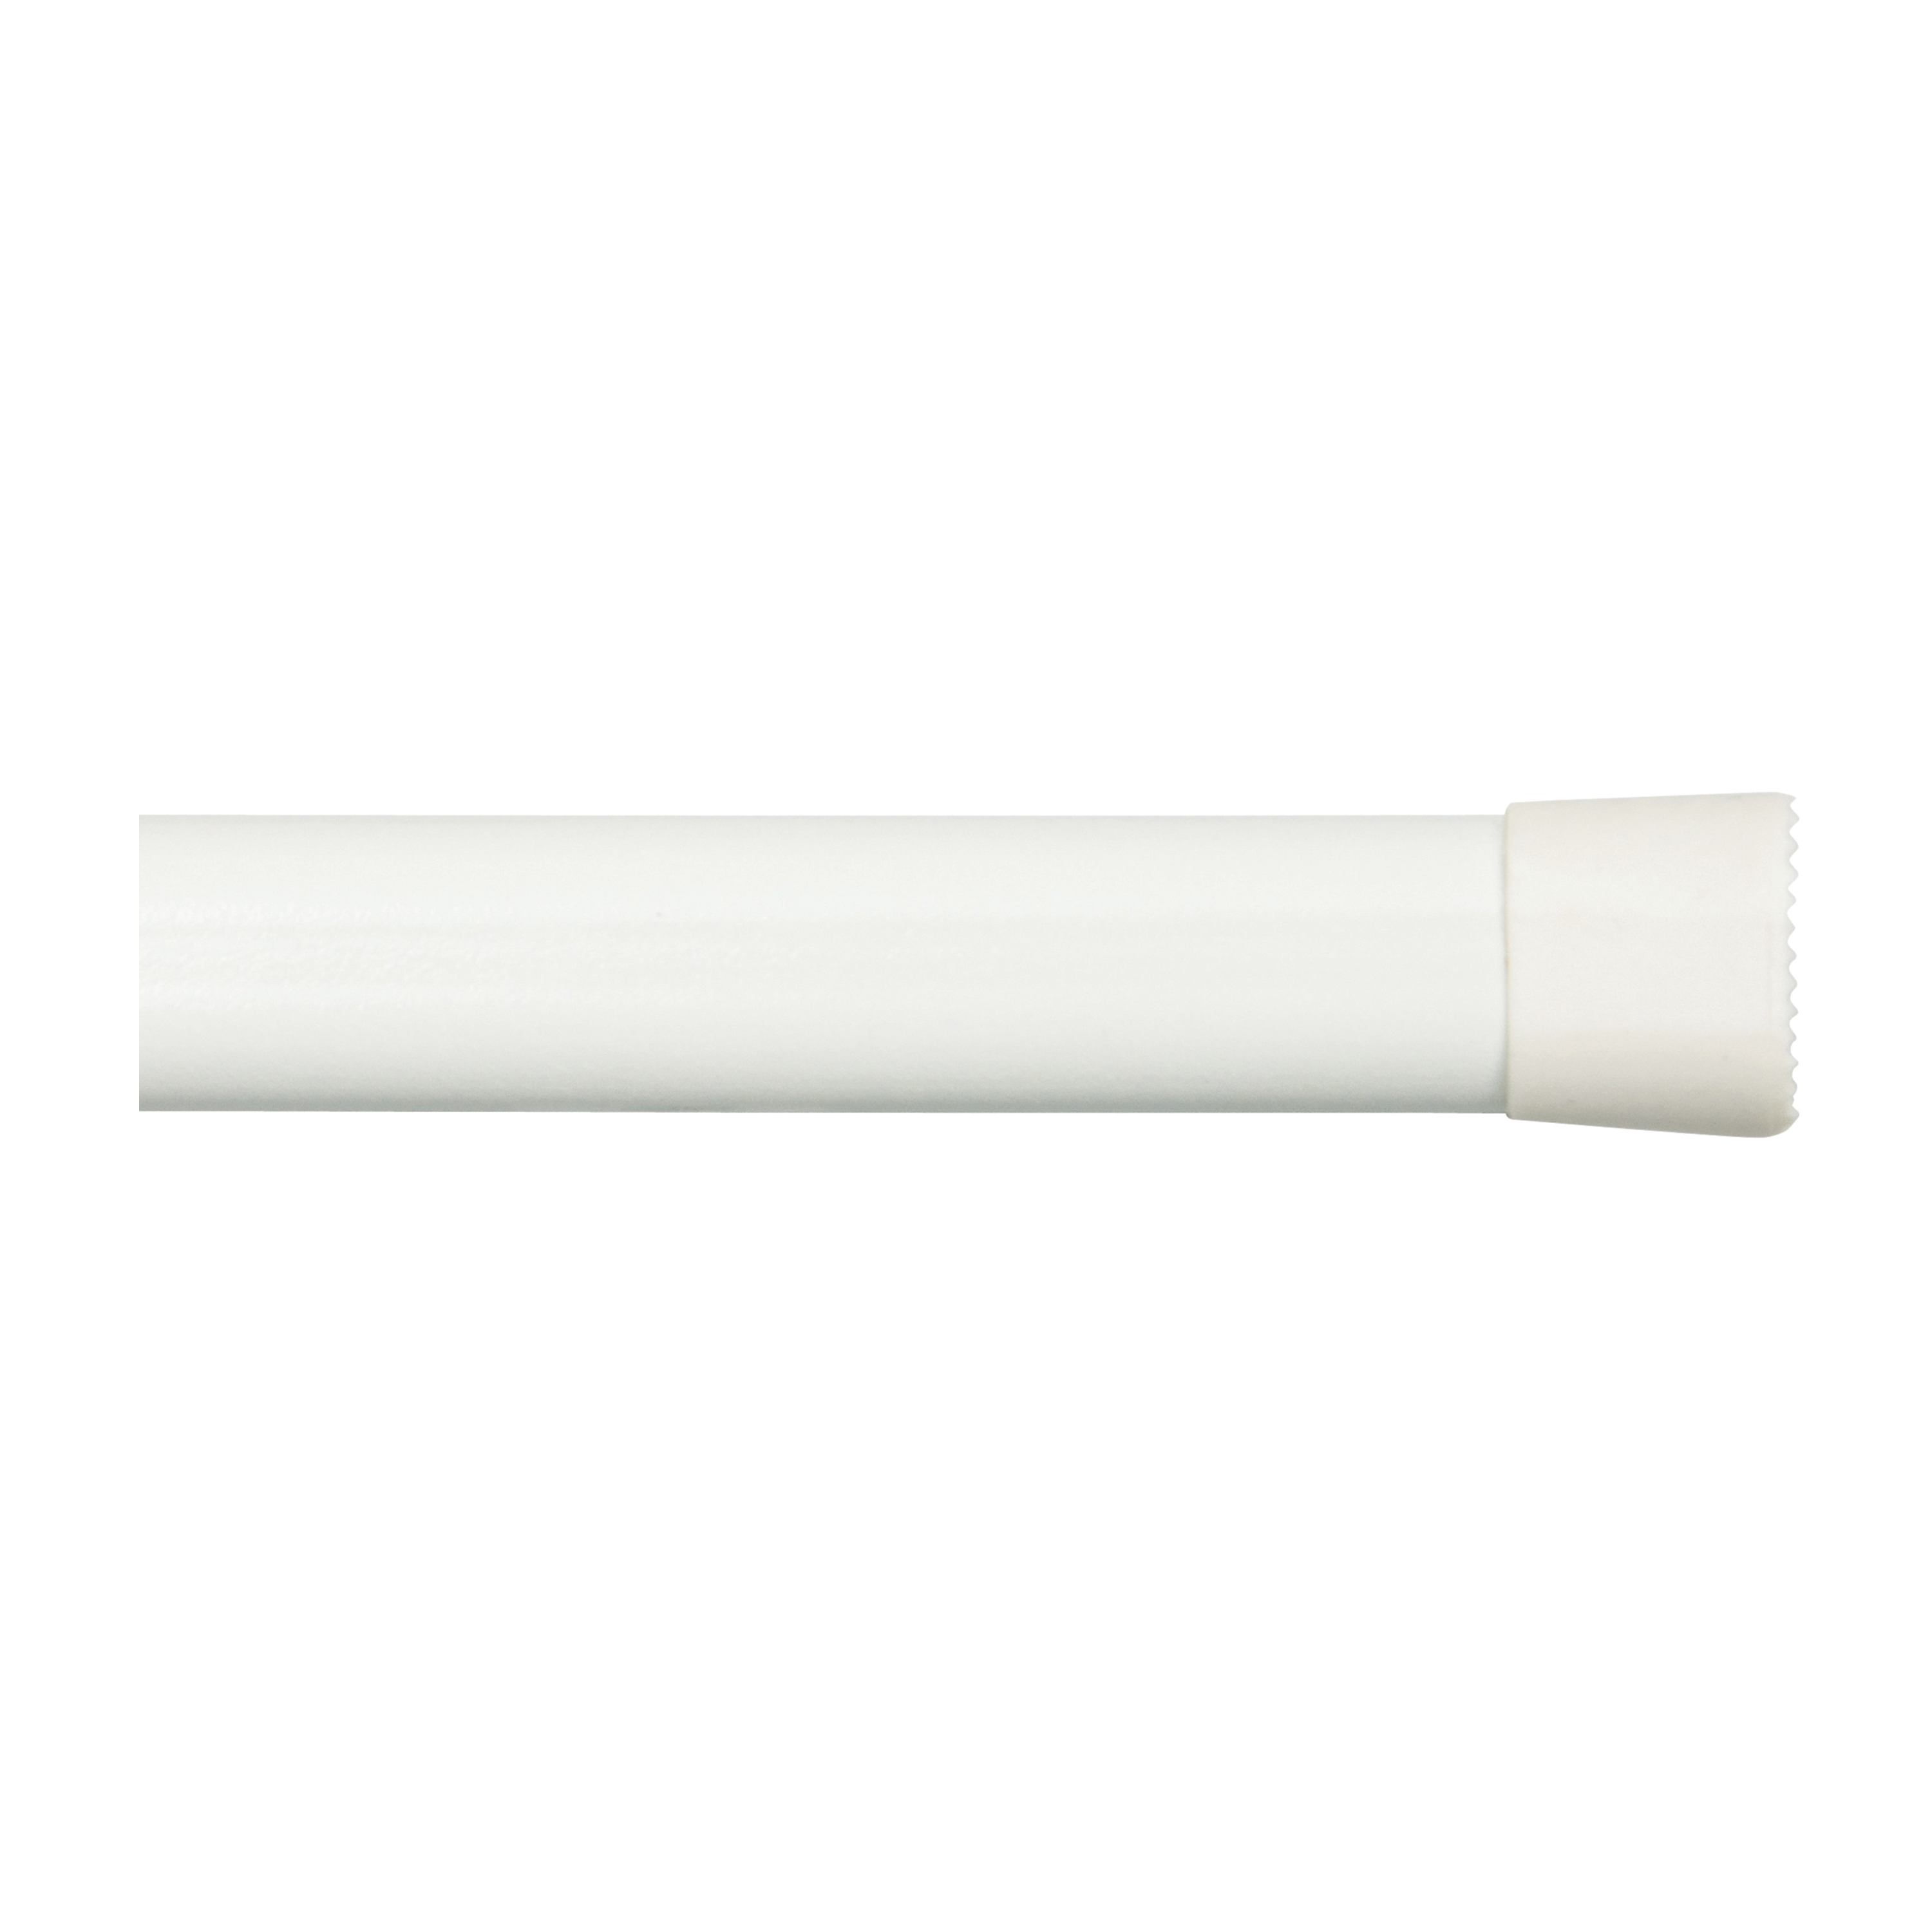 Twist & Fit Hansen KN616NP Spring Tension Rod, 5/8 in Dia, 22 to 36 in L, Plastic, White